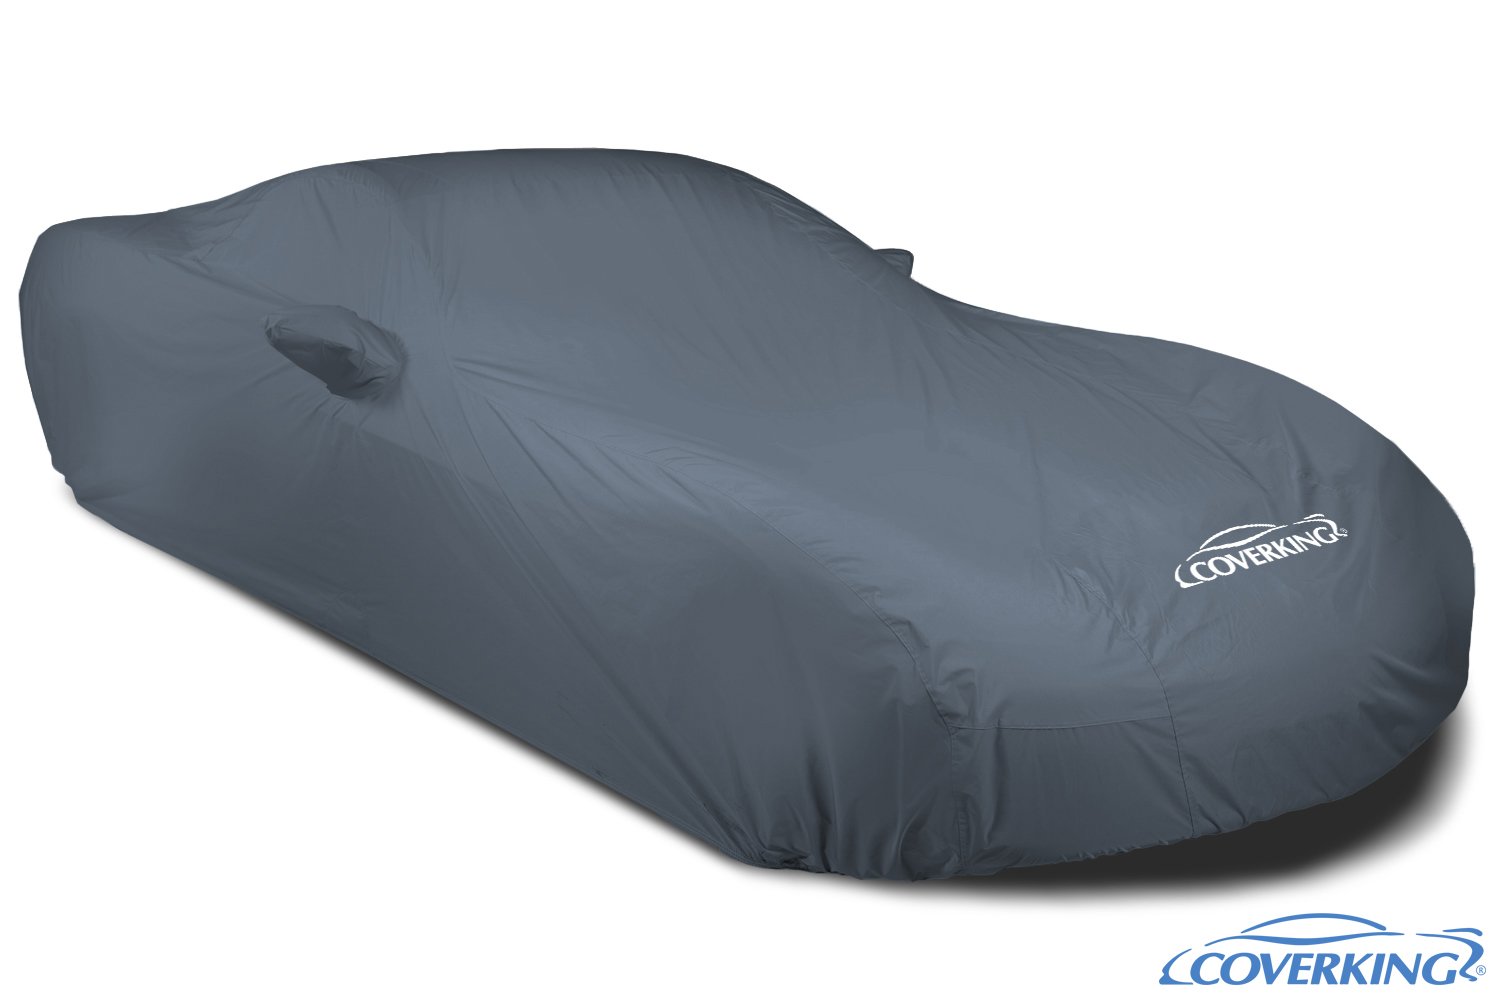 Coverking-Stormproof-All-Weather-Car-Cover-3.jpg